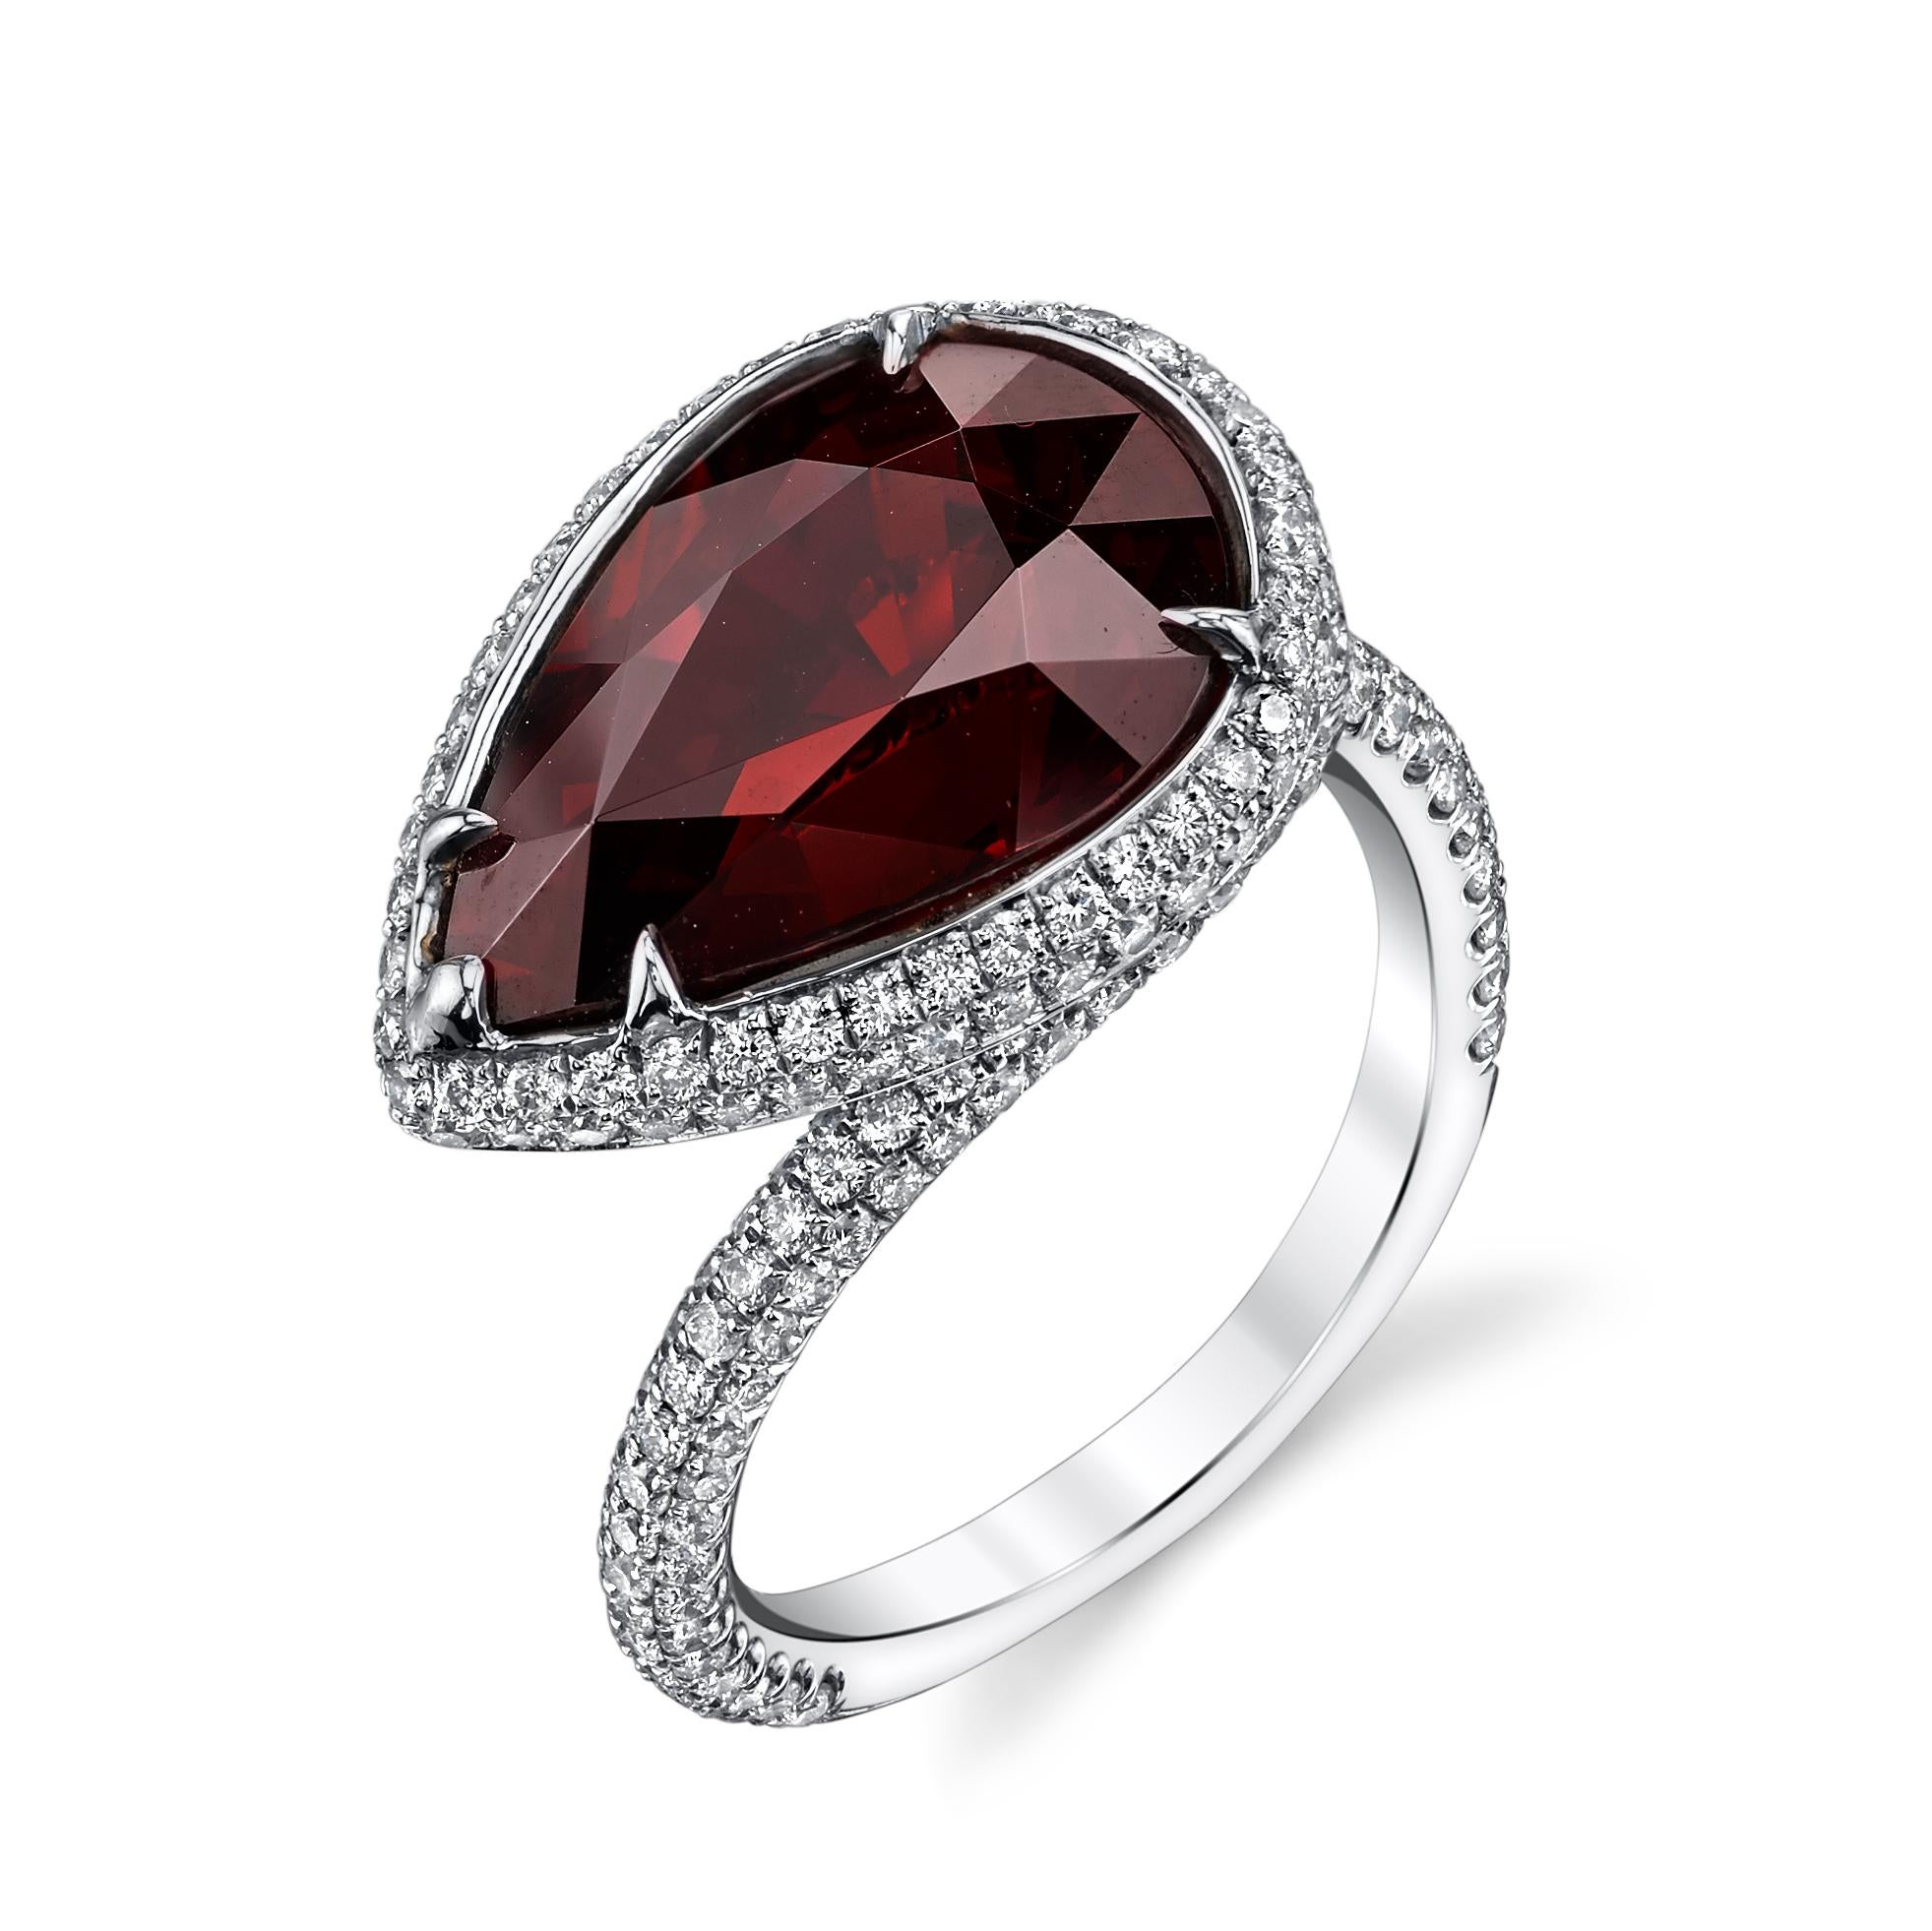 Sensual and sleek, this ring features a stunning pear-shaped Garnet that instantly captures your attention. The Ancient Egyptians frequently adorned themselves with crowns dazzled with garnet. It was considered to be the single most prized